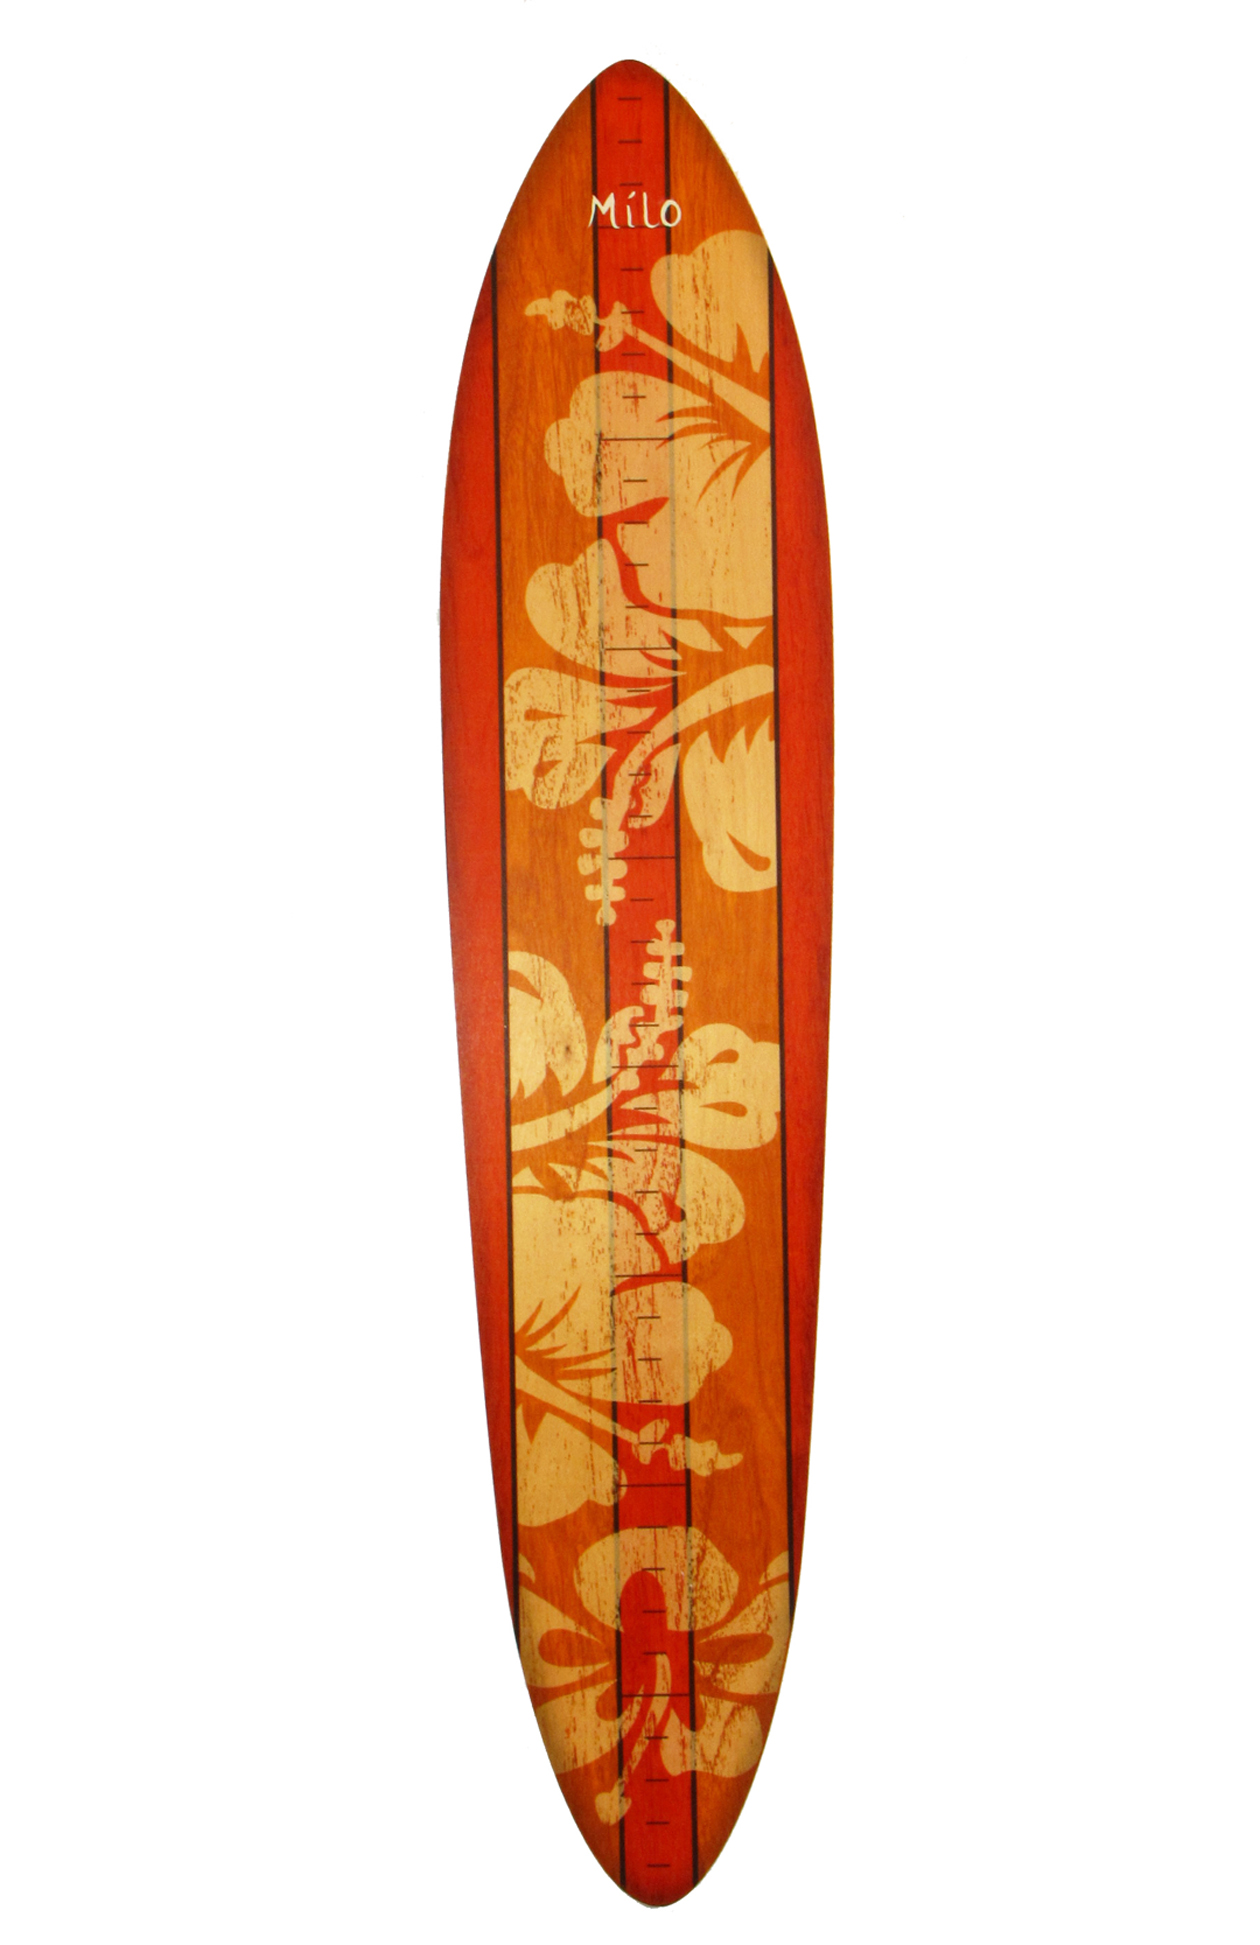 Cliparti1 Surfboard Image Png Image Clipart